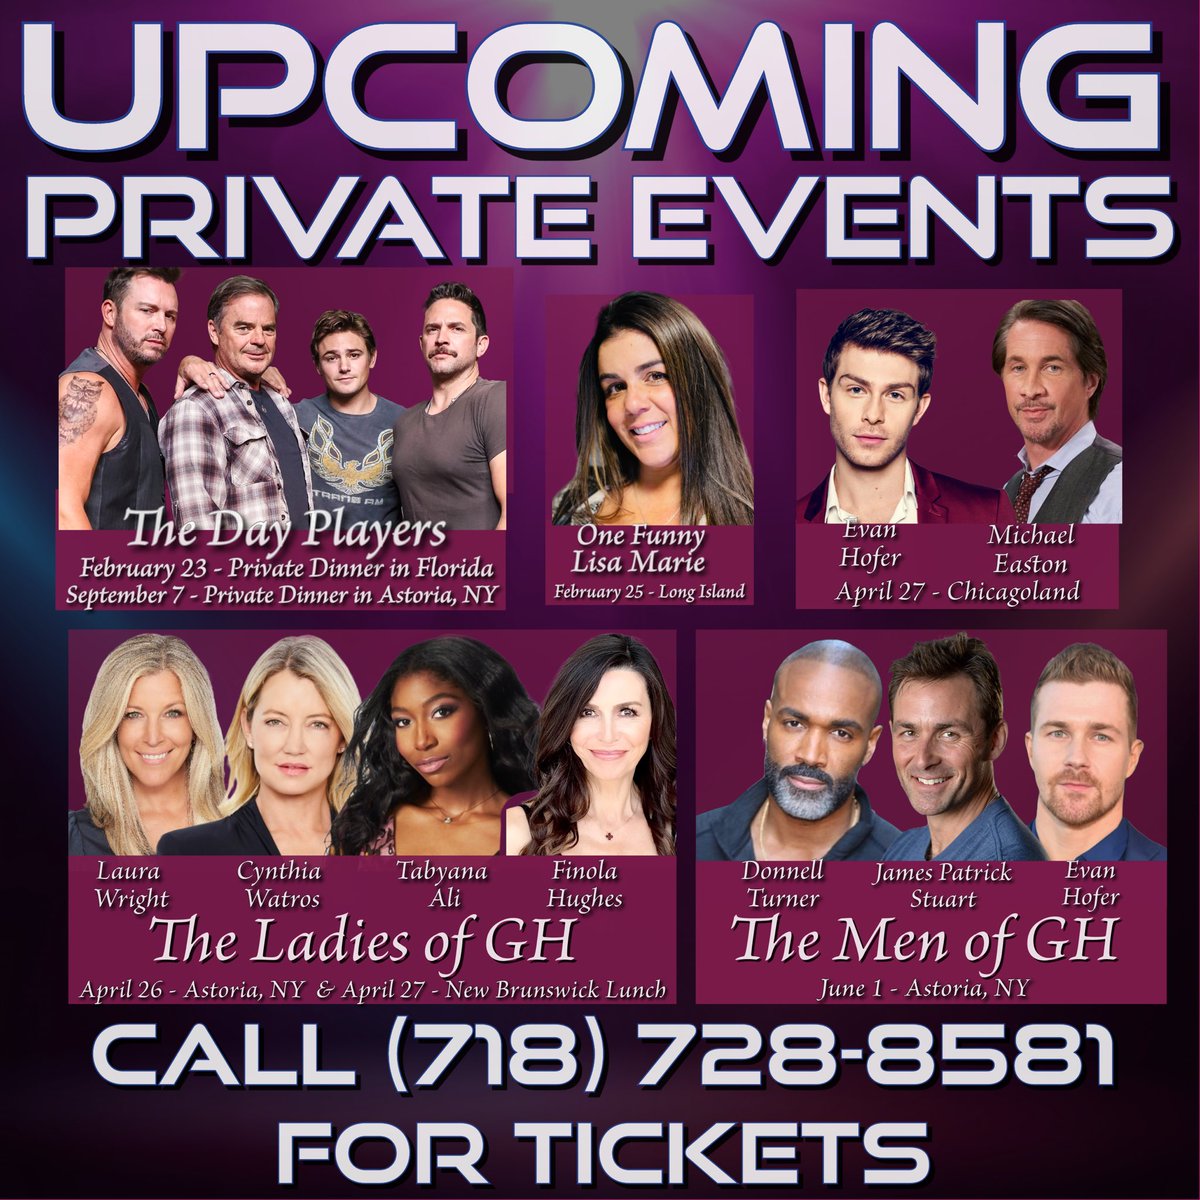 Our private fan events are like no other! 
Mega stars, mega fun! 
The Day players are doing their first dinner in #Florida in just a few weeks! 
#Tiktokmom #Onefunnylisamarie heads to #LongIsland @EvanHofer #Michaeleaston in #Chicago area! #GeneralHospital ladies in Feb &more!